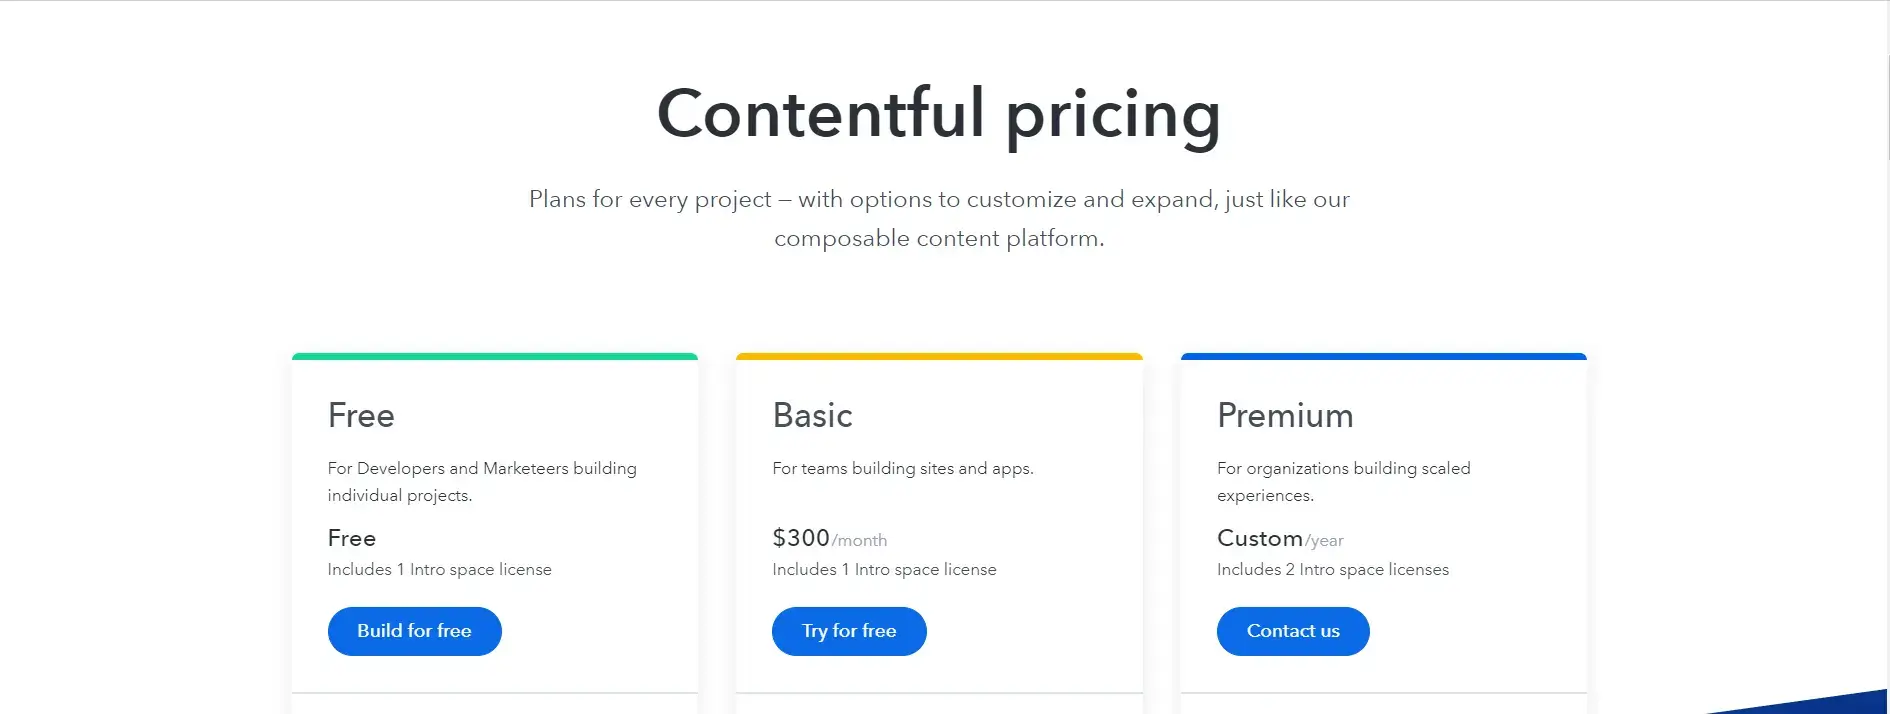 Contentful pricing plans